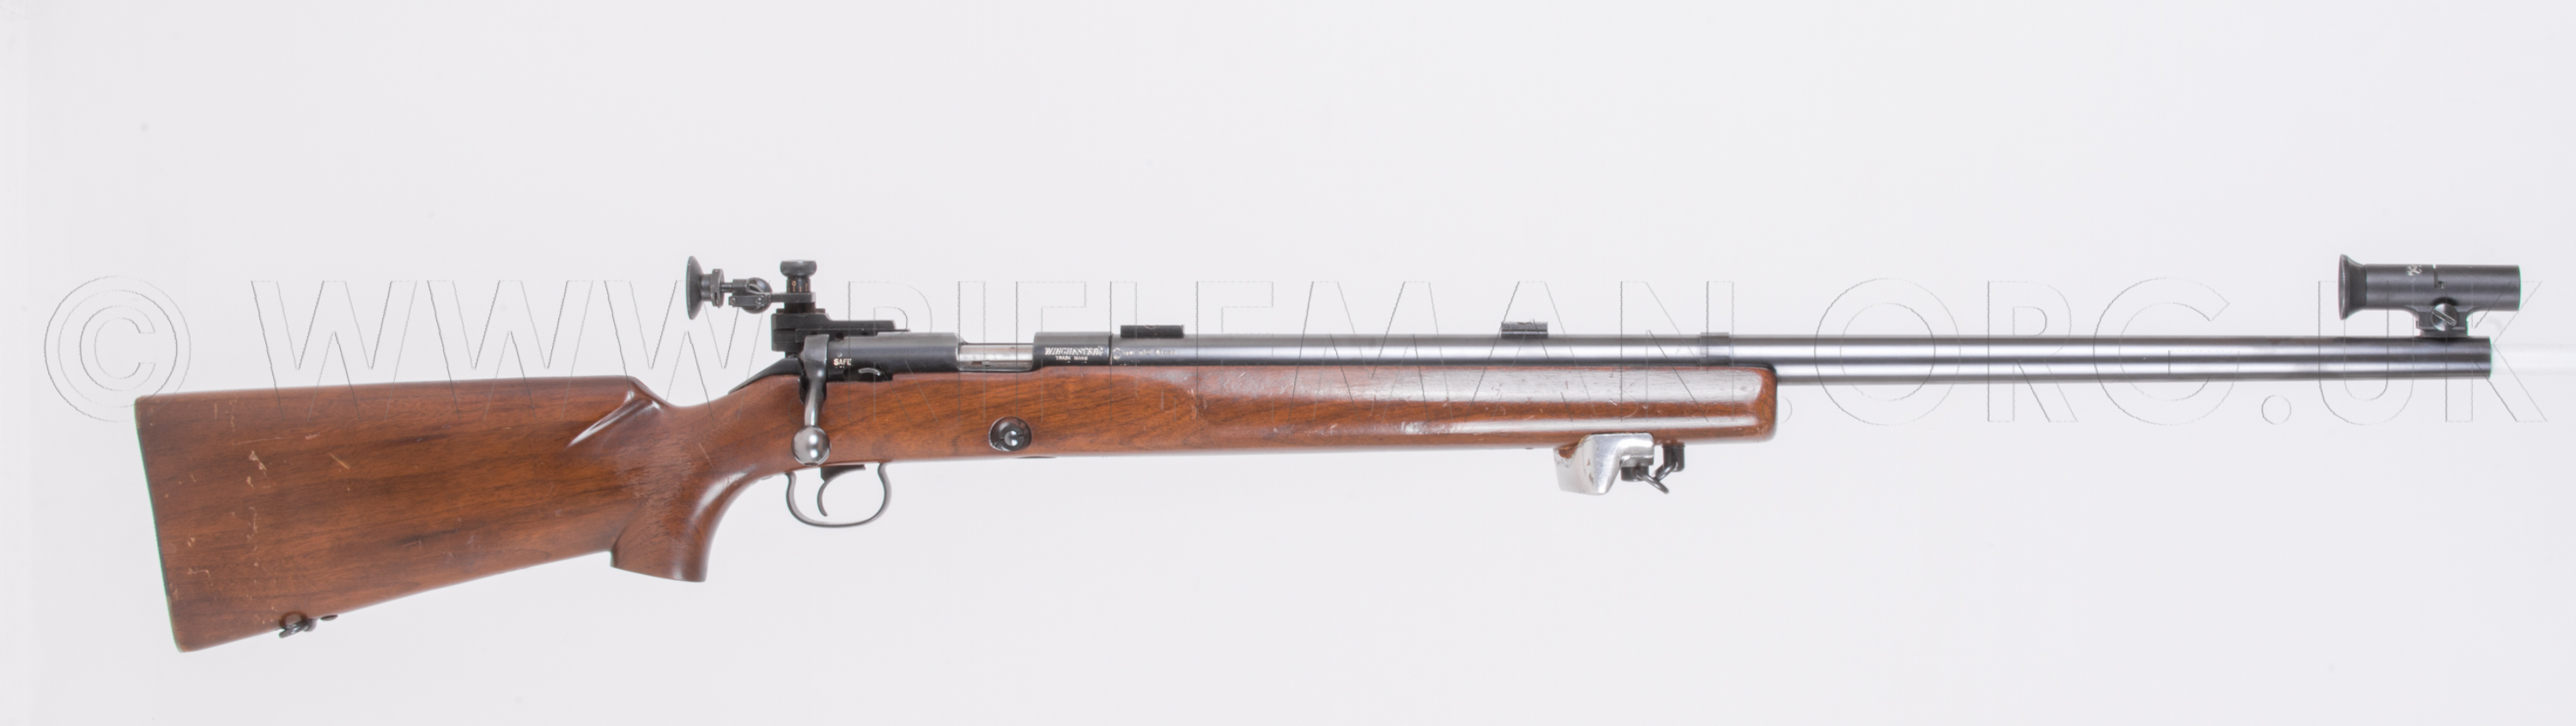 Winchester Model 52 Target rifles history and imagery